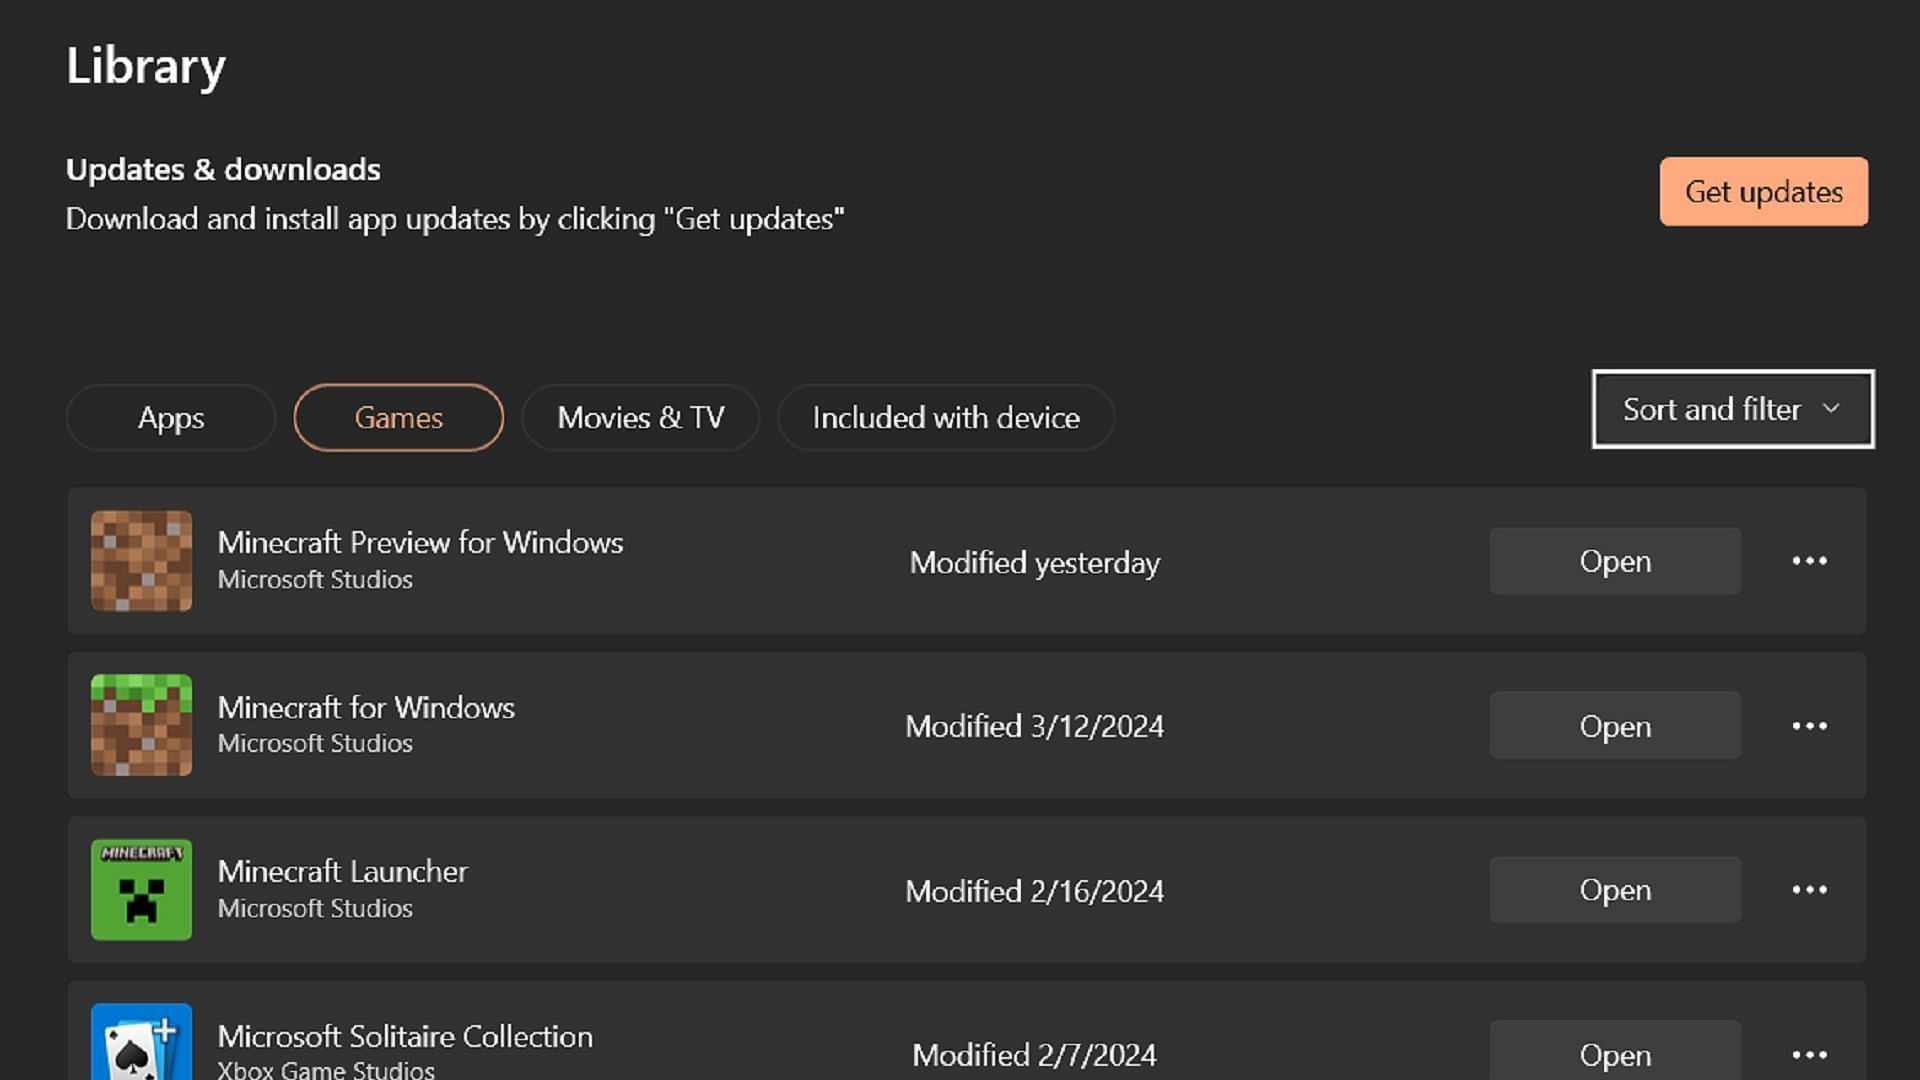 Updating to version 1.20.72 on Windows PCs requires an outside application (Image via Microsoft)